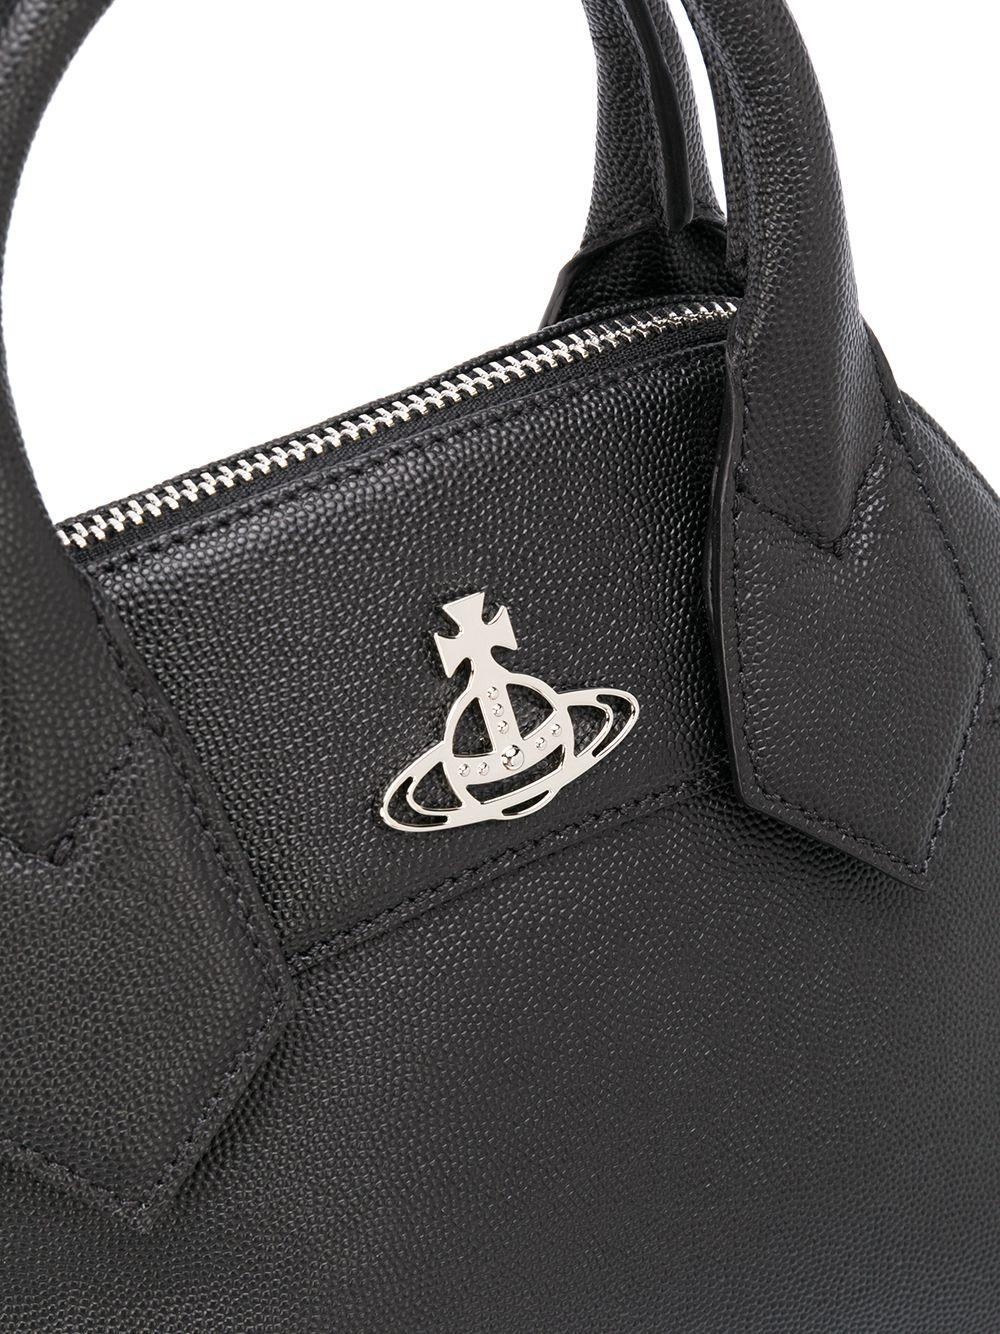 Vivienne Westwood Leather Logo Plaque Zipped Tote in Black - Lyst